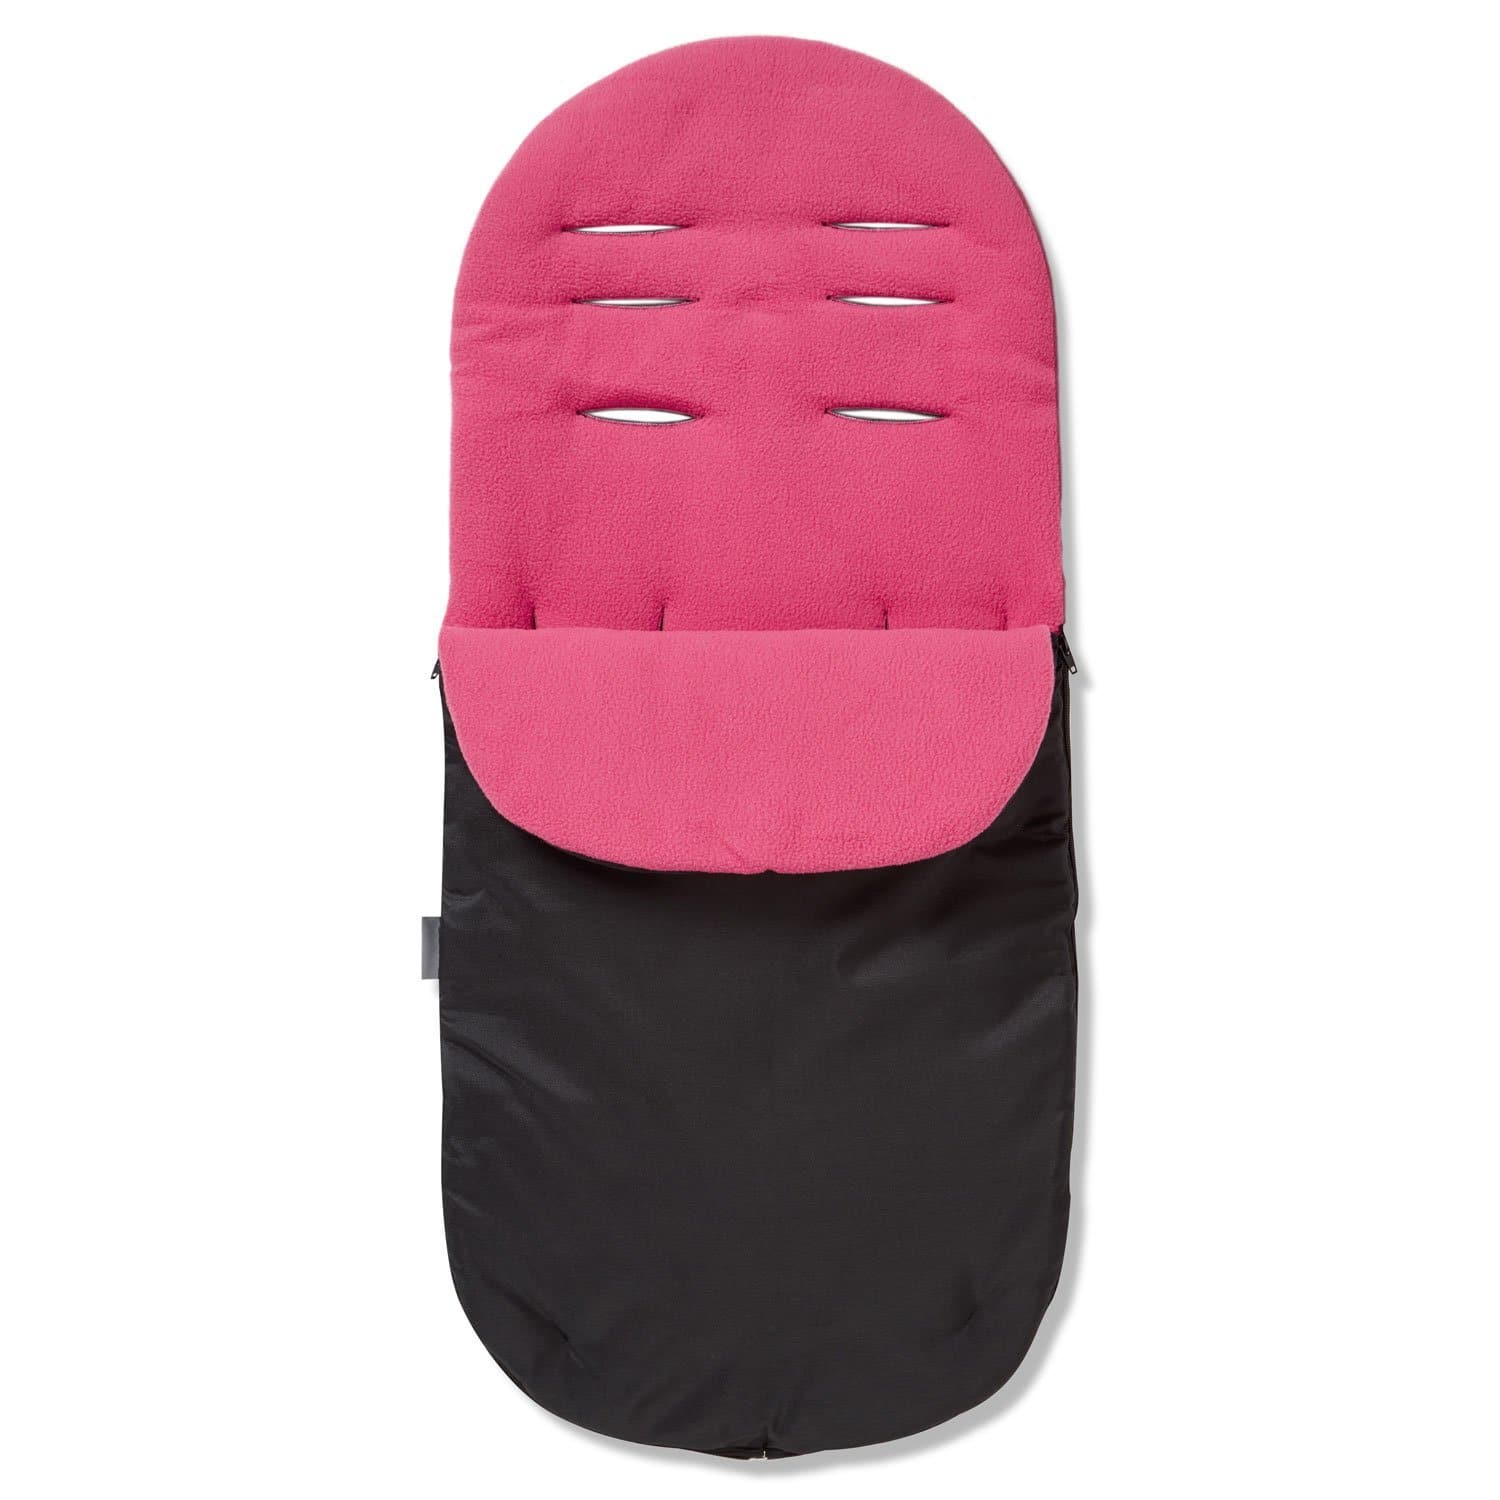 Footmuff / Cosy Toes Compatible with Babylo - Dark Pink / Fits All Models | For Your Little One